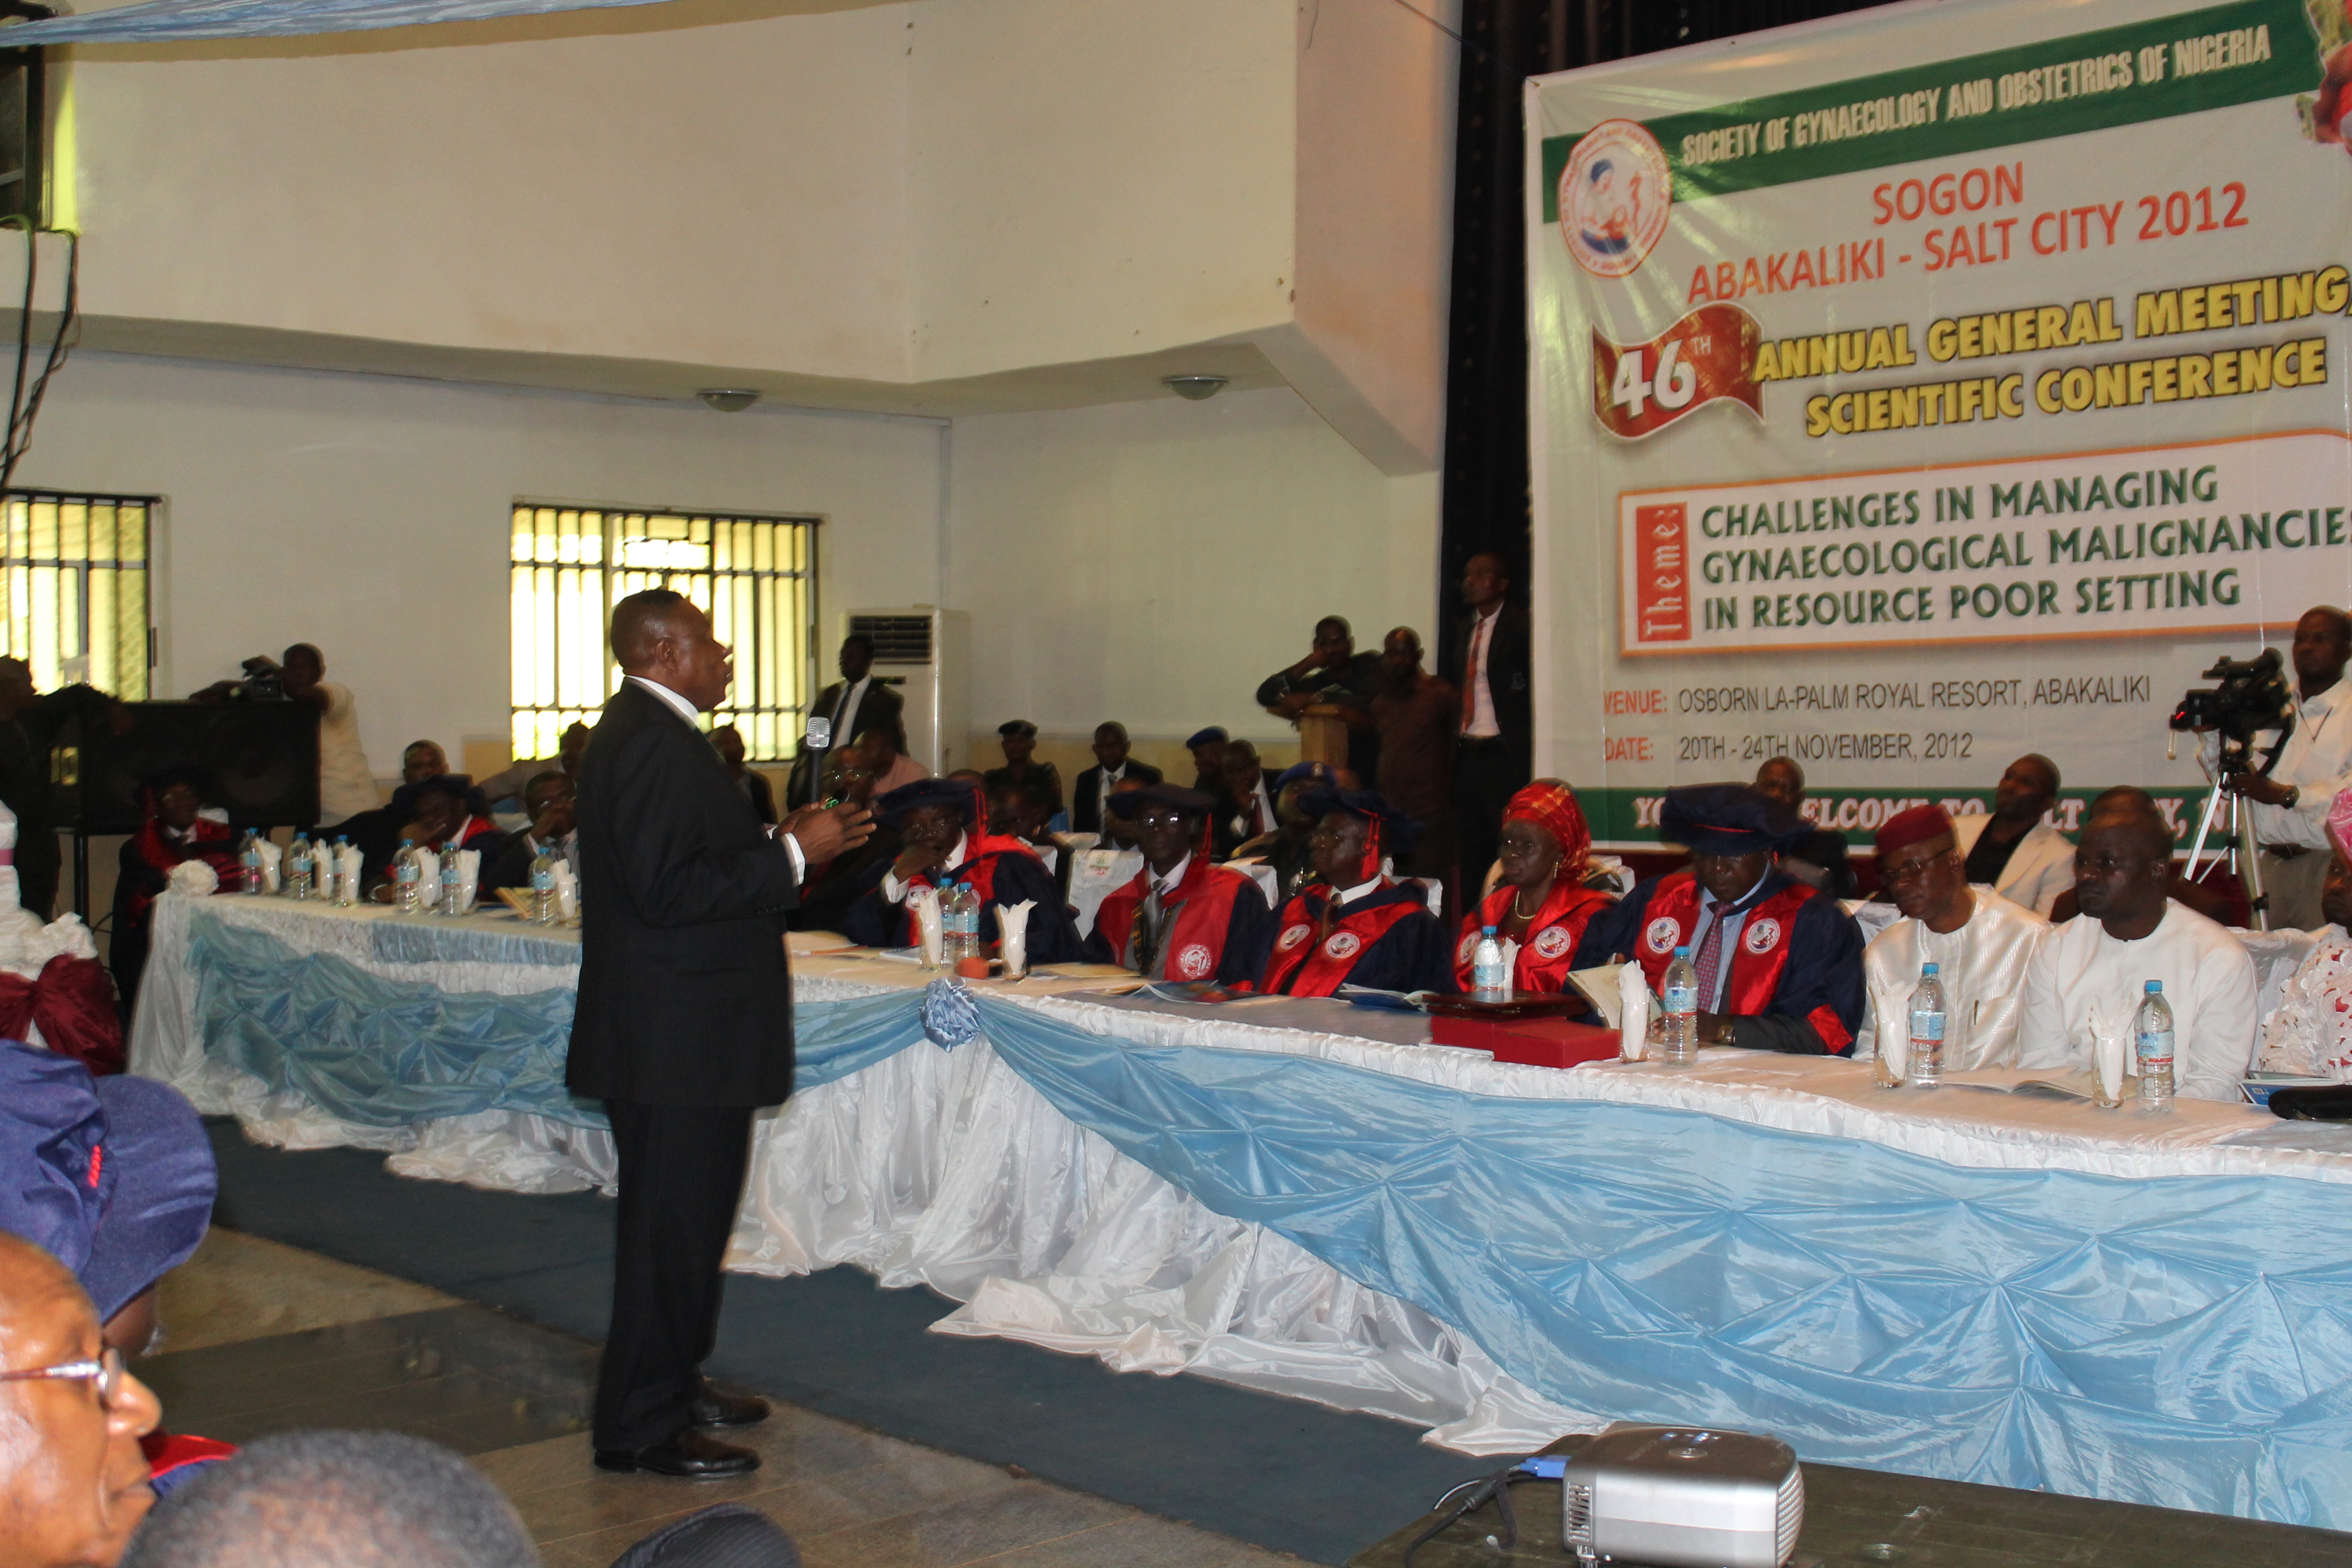 Prof. Briggs at at the 46th SCIENTIFIC CONFERENCE of the SOCIETY OF GYNAECOLOGY AND OBSTETRICS OF NIGERIA(SOGON) Affiliated to the International Federation of Gynecology and Obstetrics (FIGO) ABAKALIKI, EBONYI STATE NIGERIA on 22 November, 2012